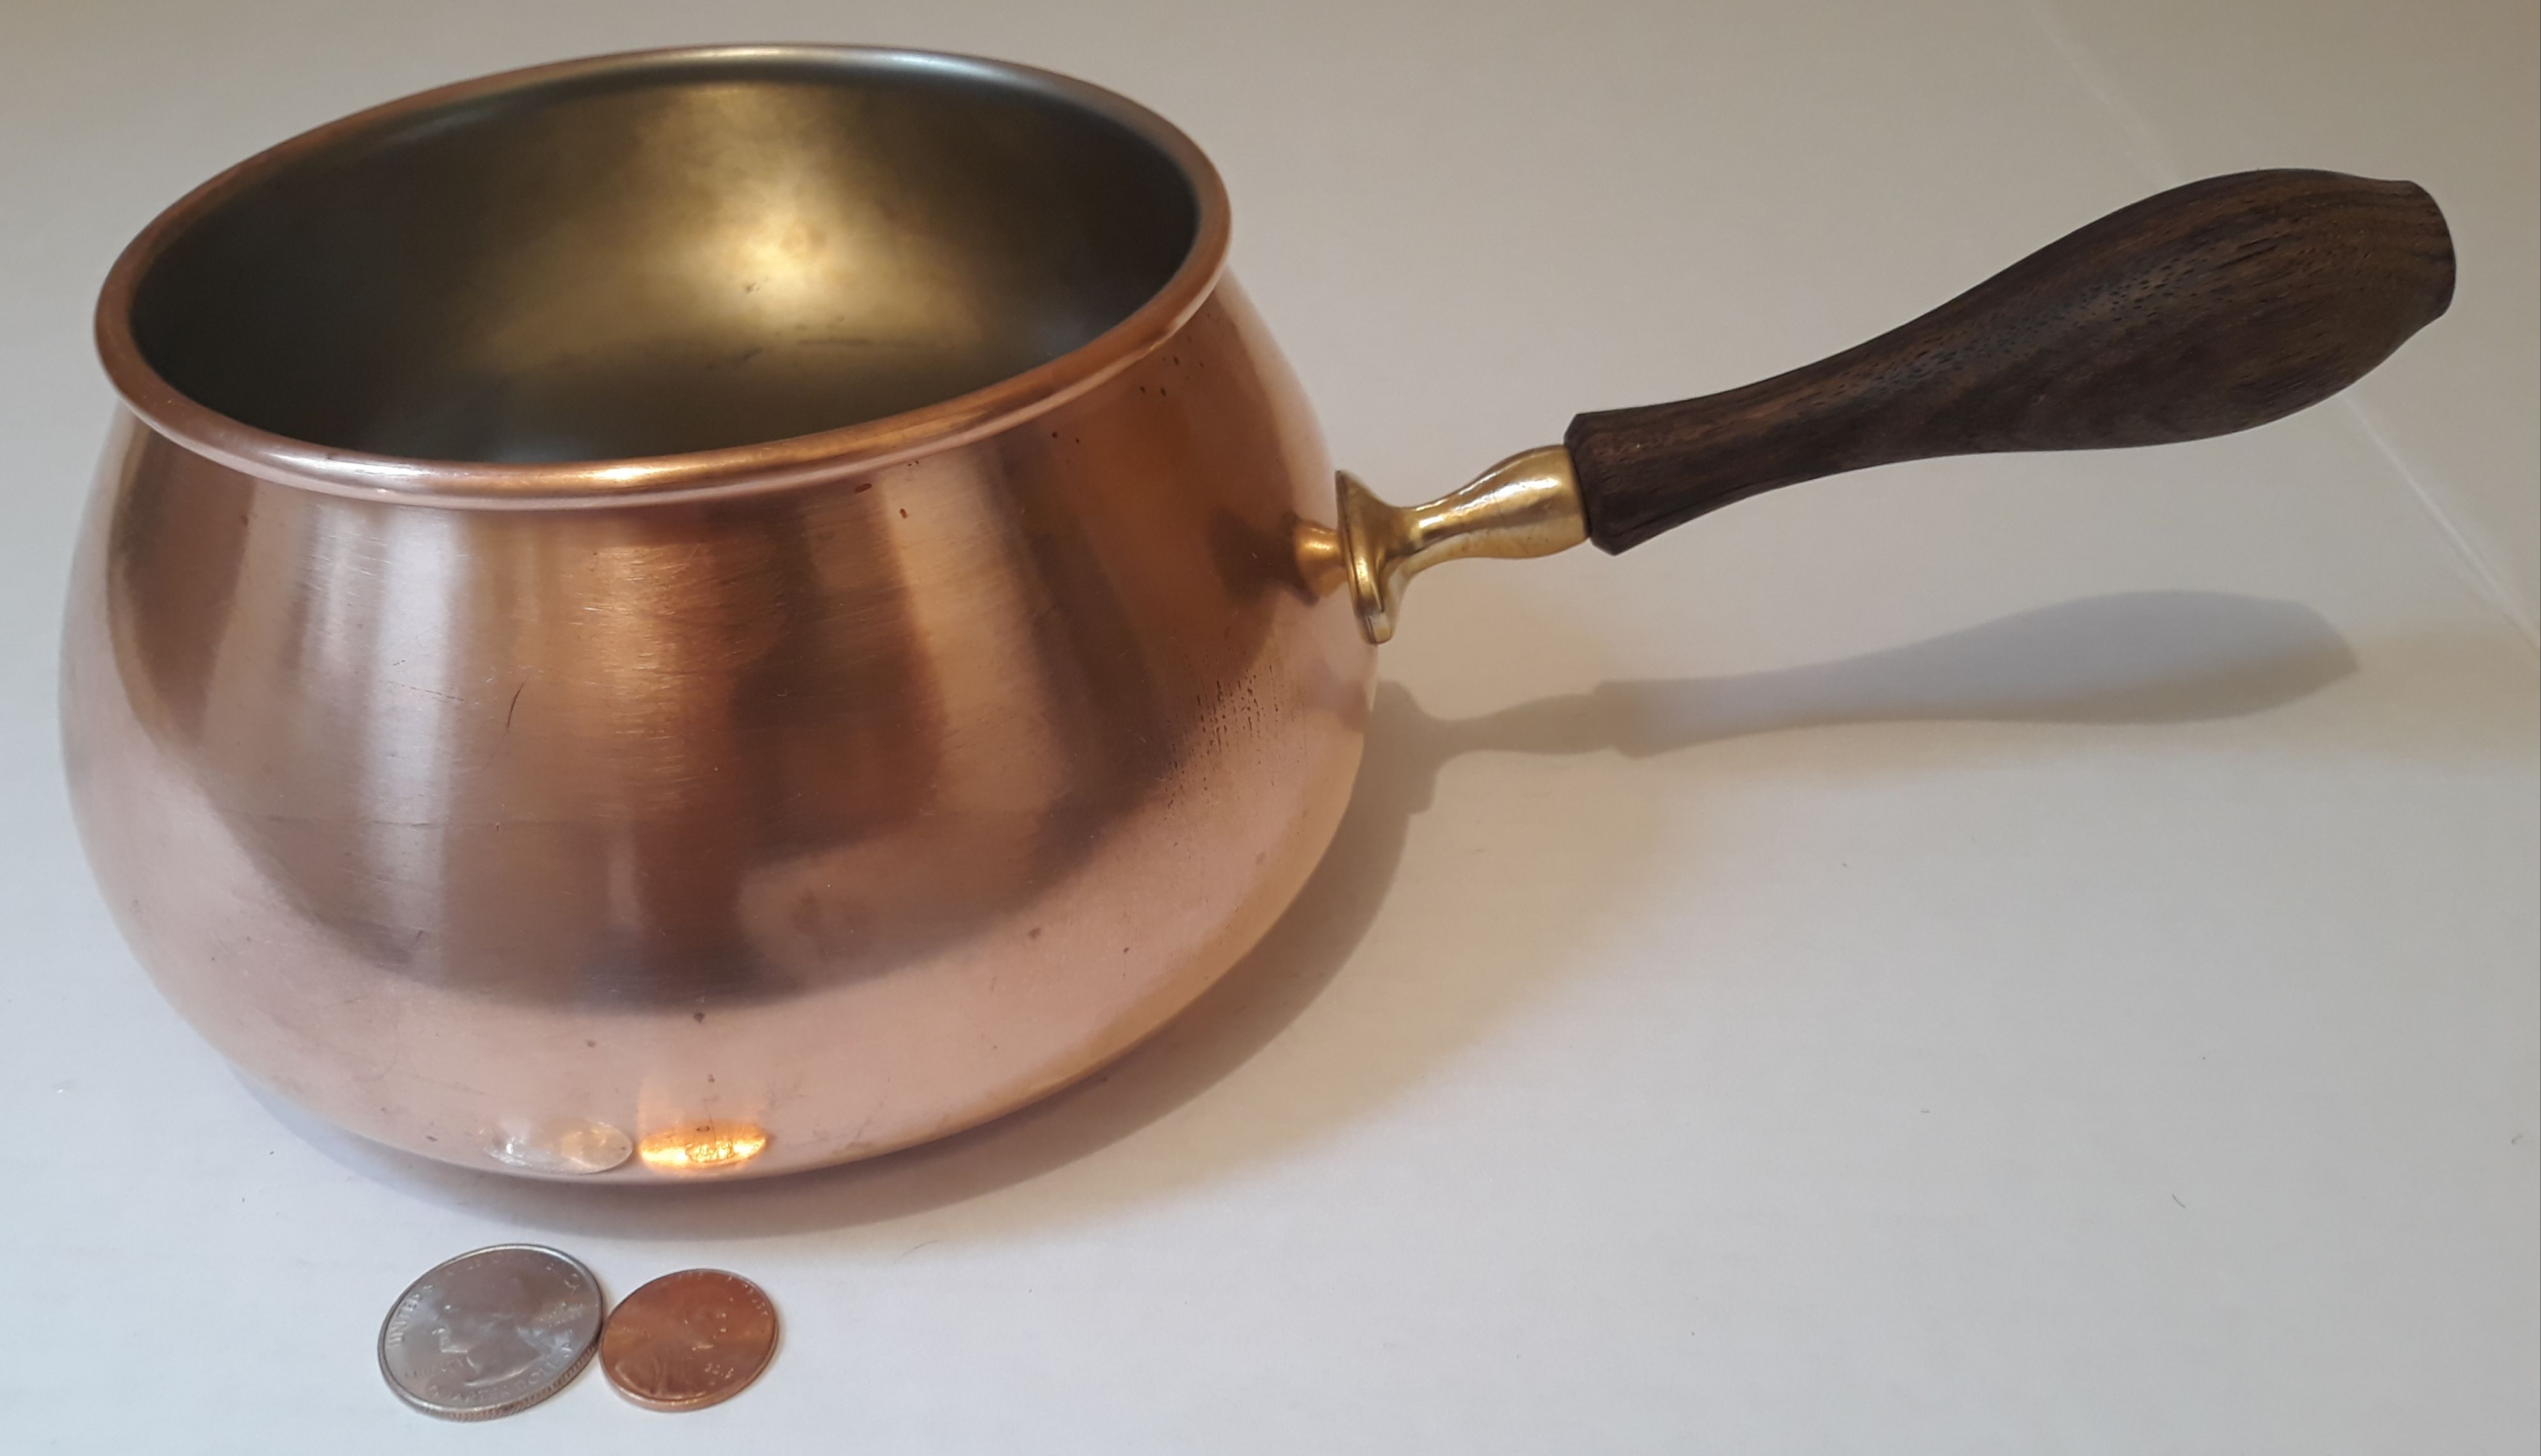 Vintage Metal Copper and Brass with Wooden Handle, Cooking, Kitchen Decor, Shelf Display, 12" Long and 6" x 3 1/2" Pan Size, Heavy Duty Quality